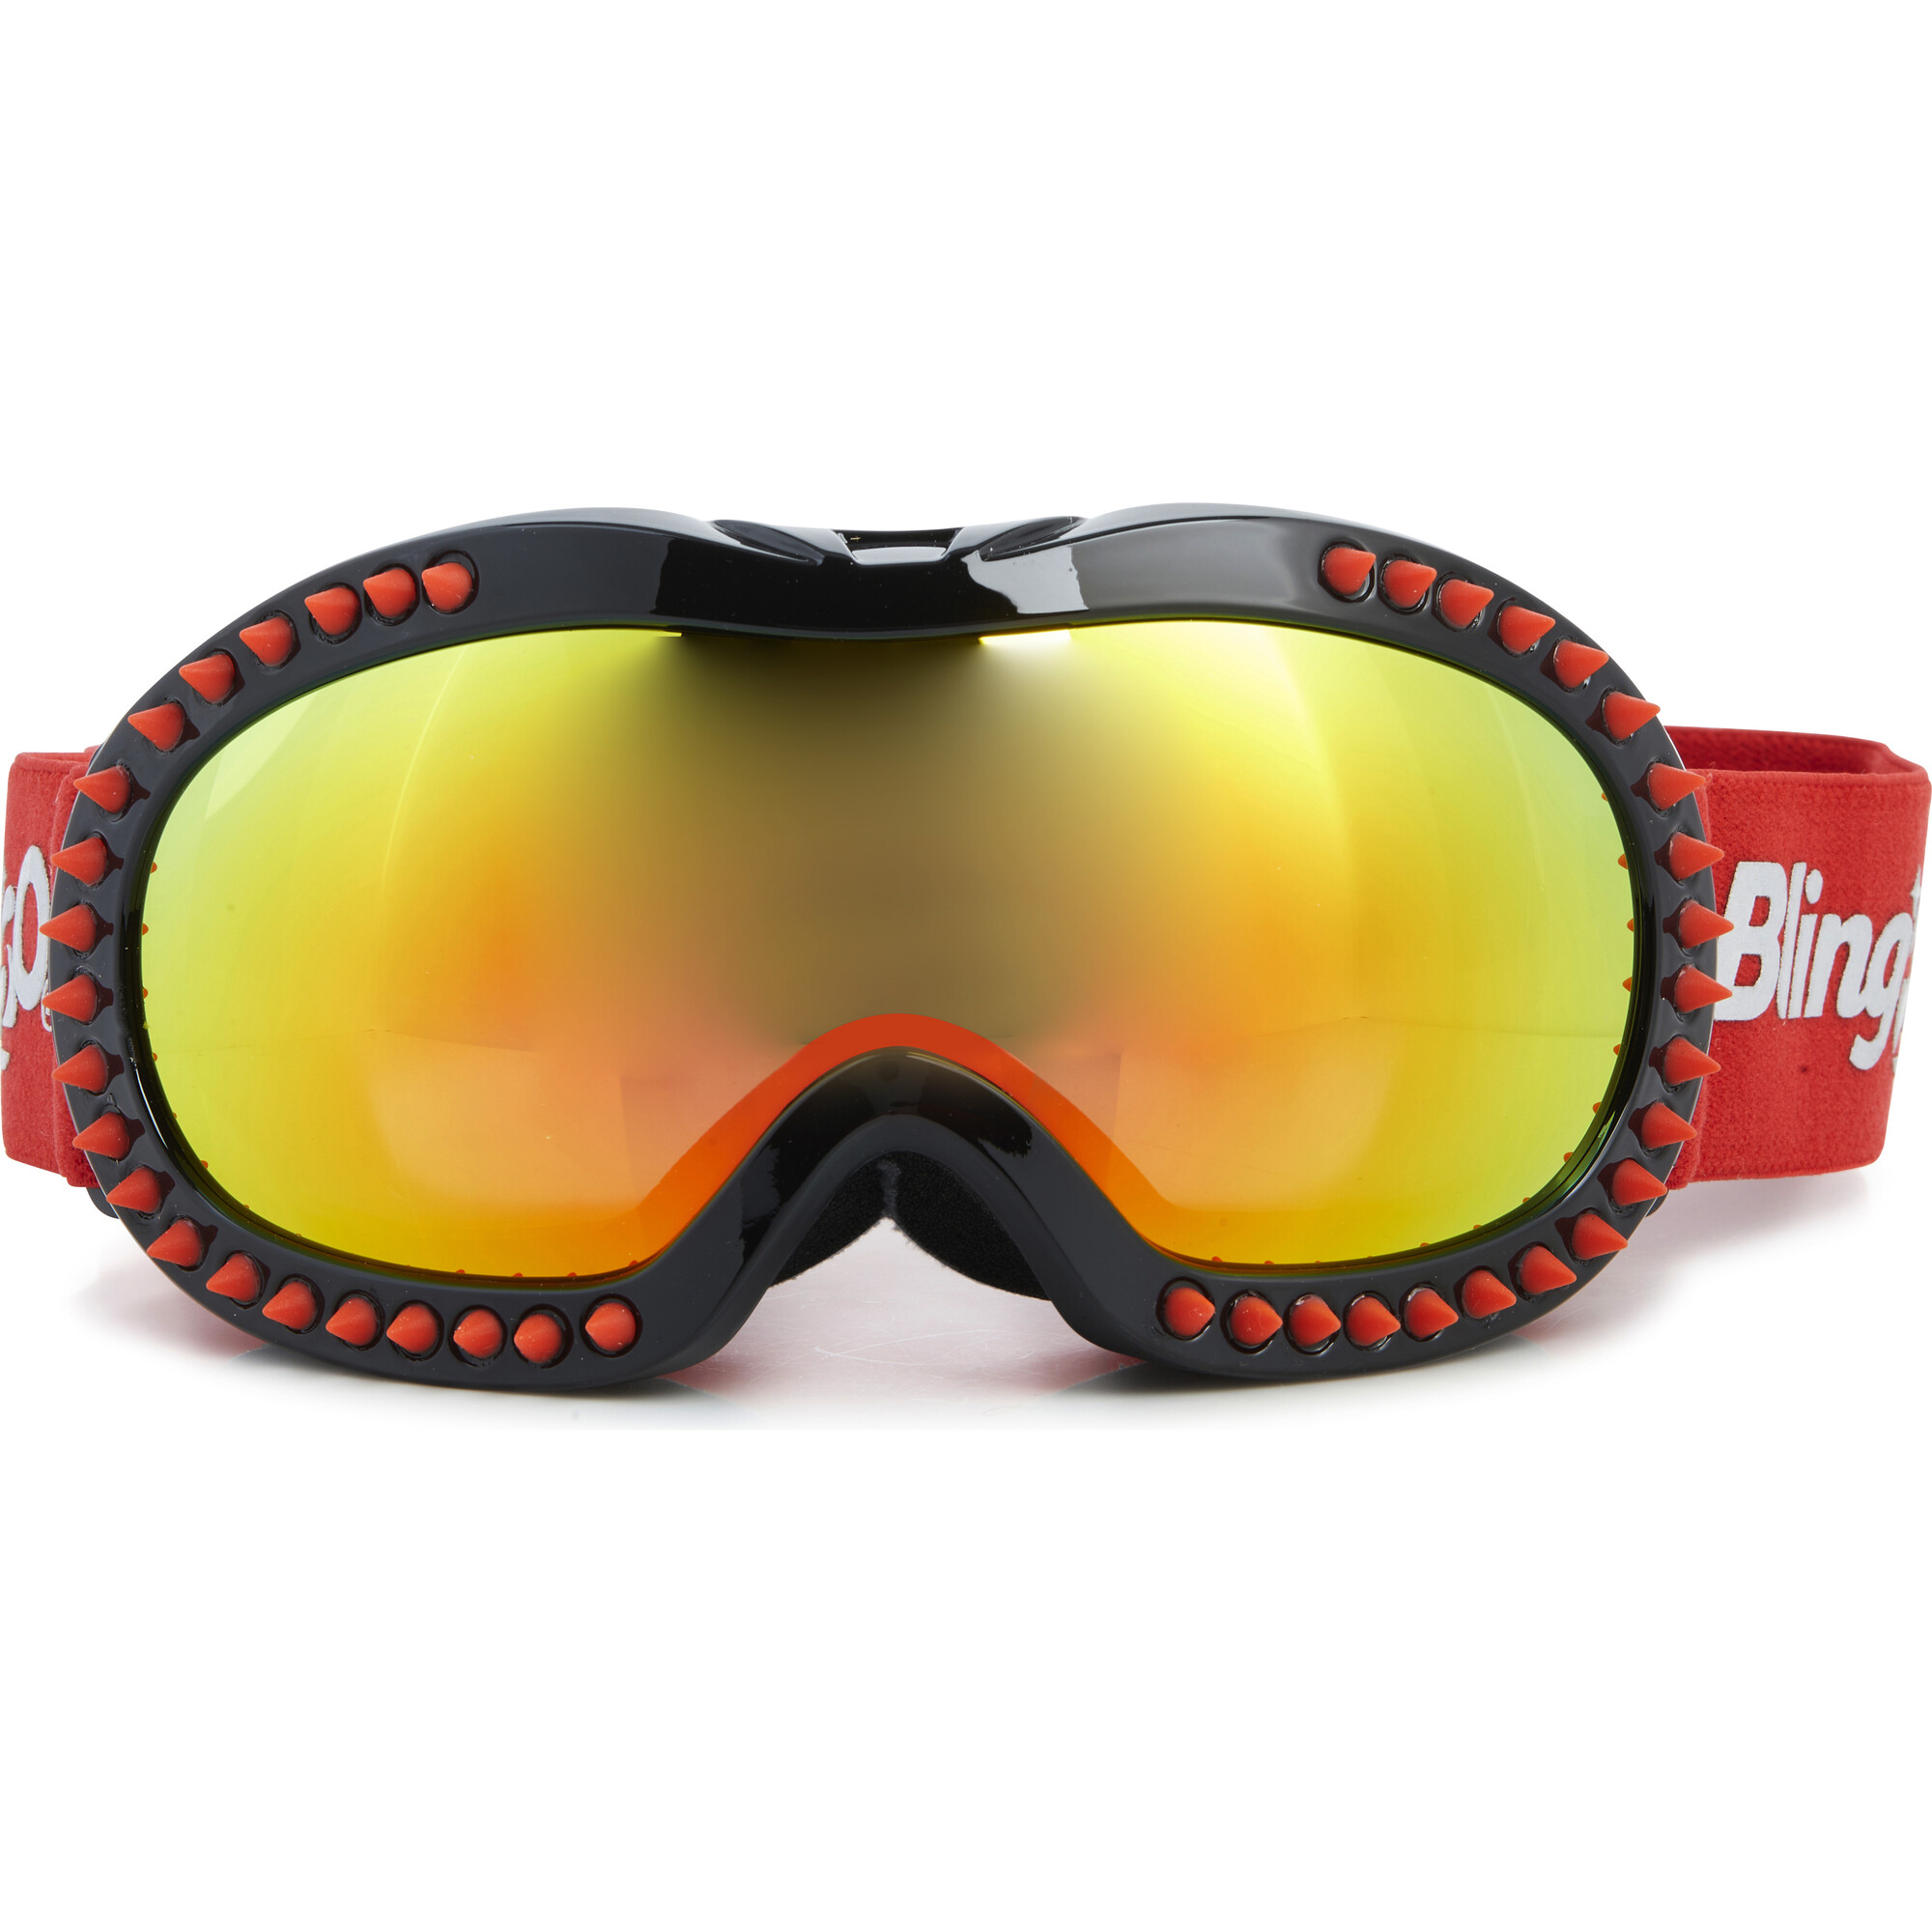 Bling2o Red Spike Polarized Snow Goggles